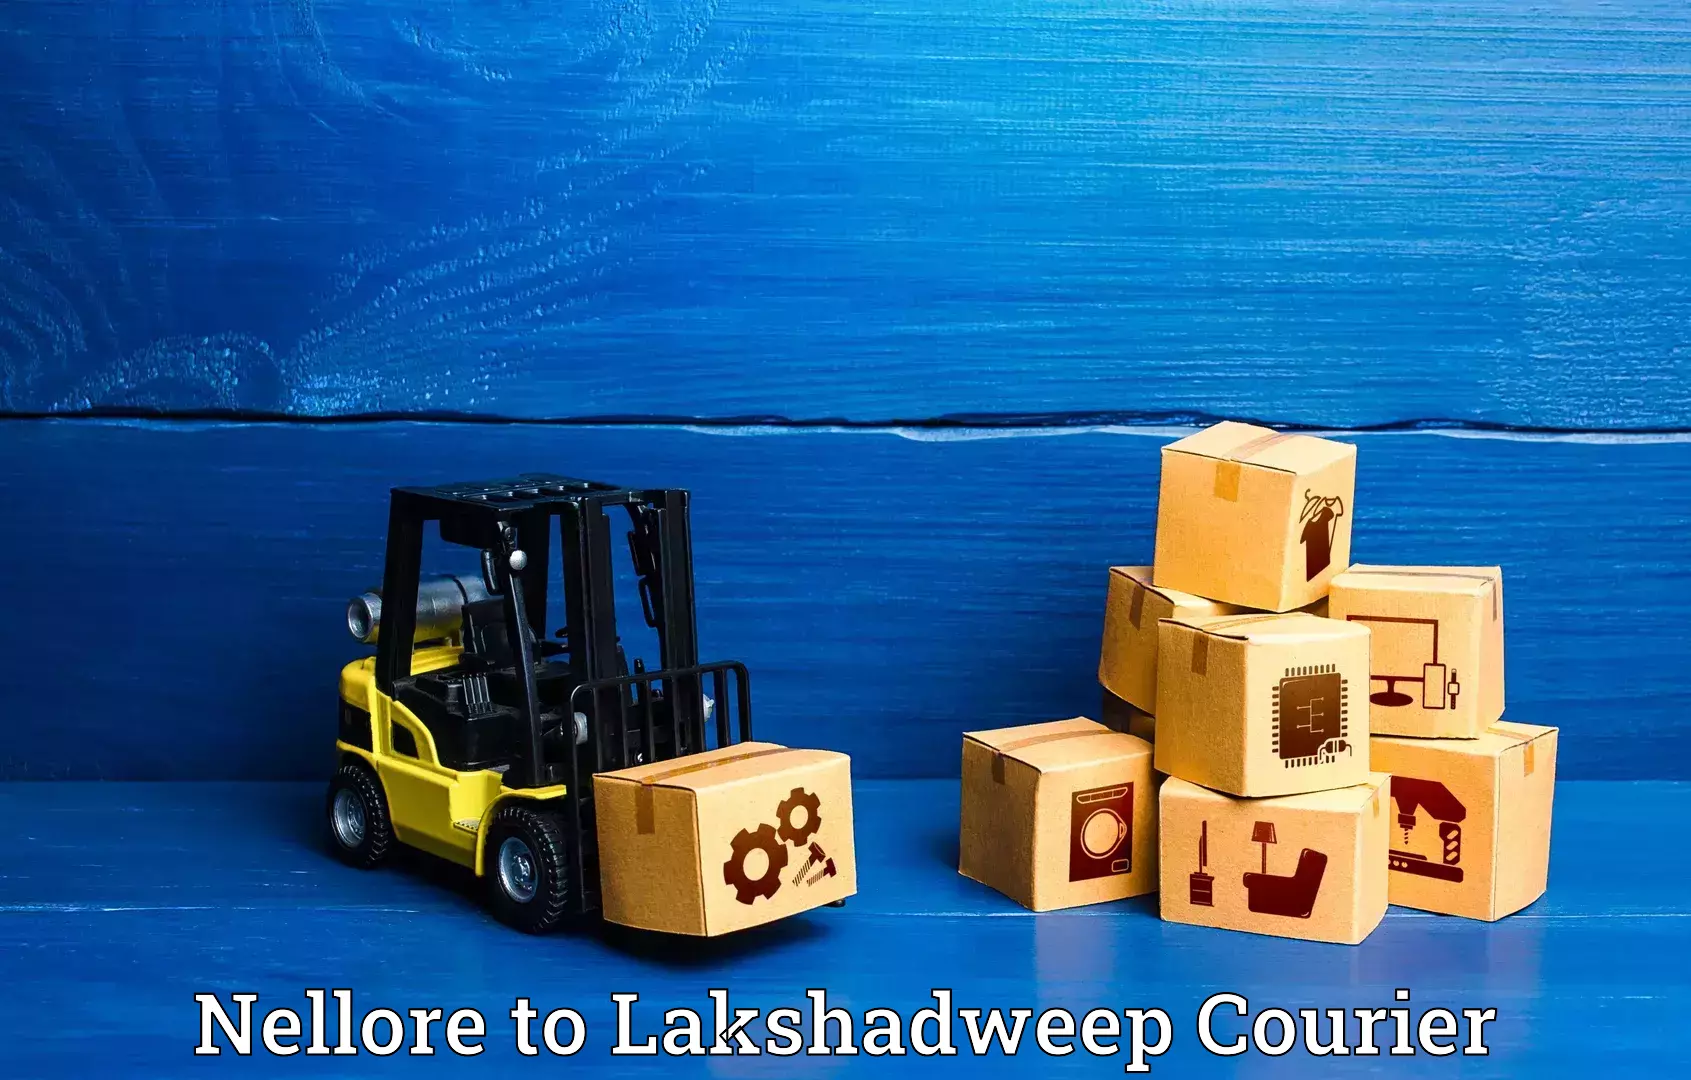 Luggage delivery system Nellore to Lakshadweep